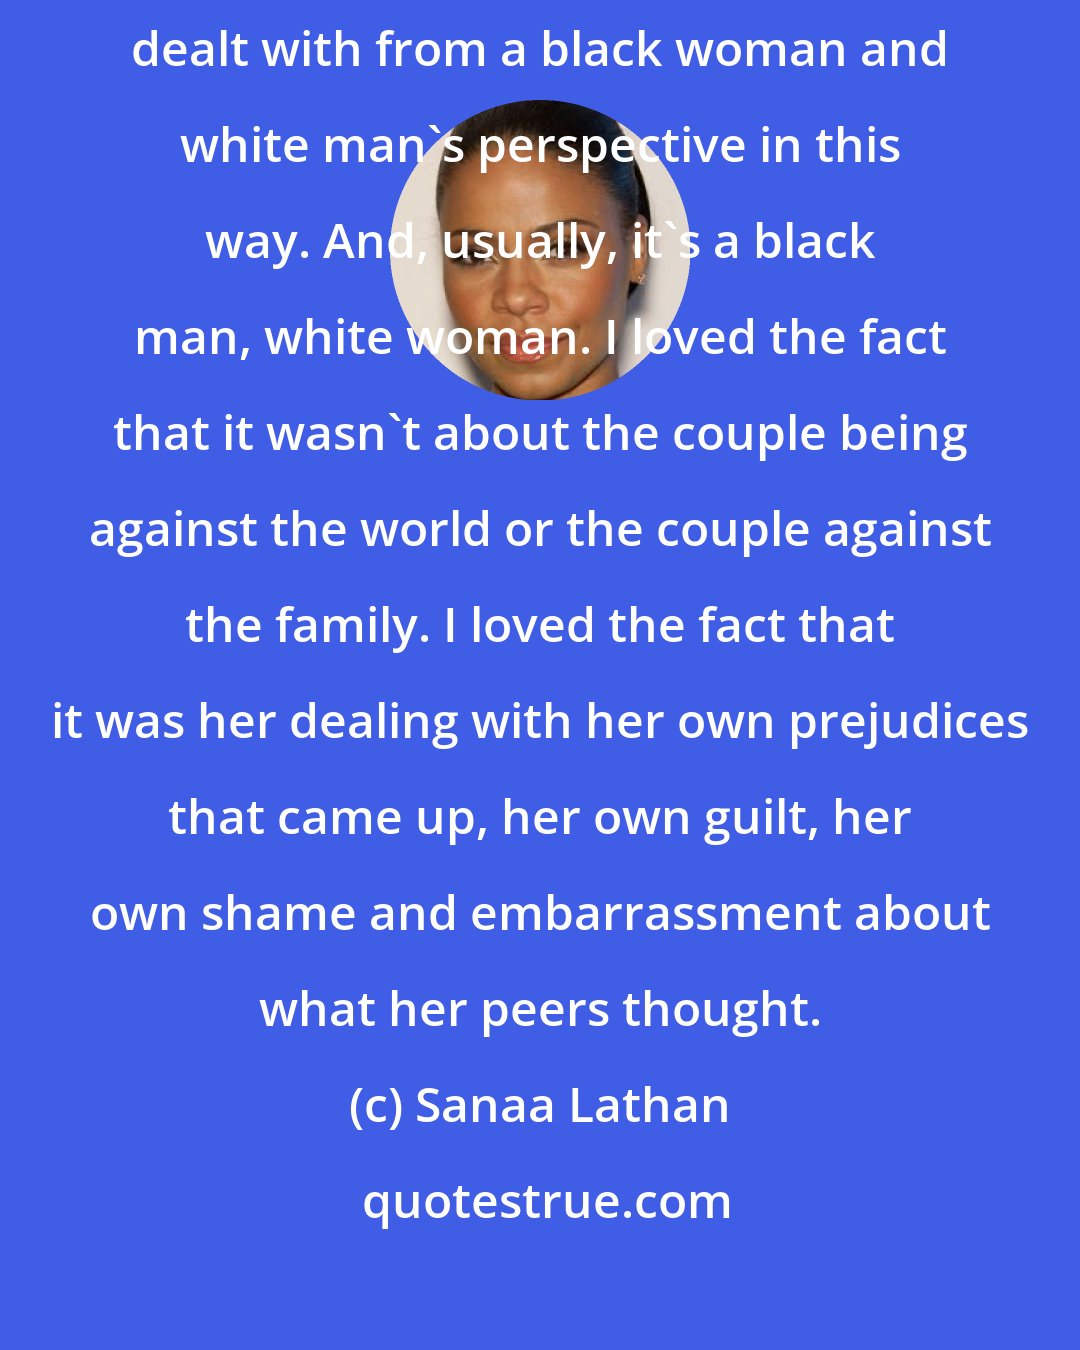 Sanaa Lathan: It was a good script [Something New]. We have not seen an interracial issue dealt with from a black woman and white man's perspective in this way. And, usually, it's a black man, white woman. I loved the fact that it wasn't about the couple being against the world or the couple against the family. I loved the fact that it was her dealing with her own prejudices that came up, her own guilt, her own shame and embarrassment about what her peers thought.